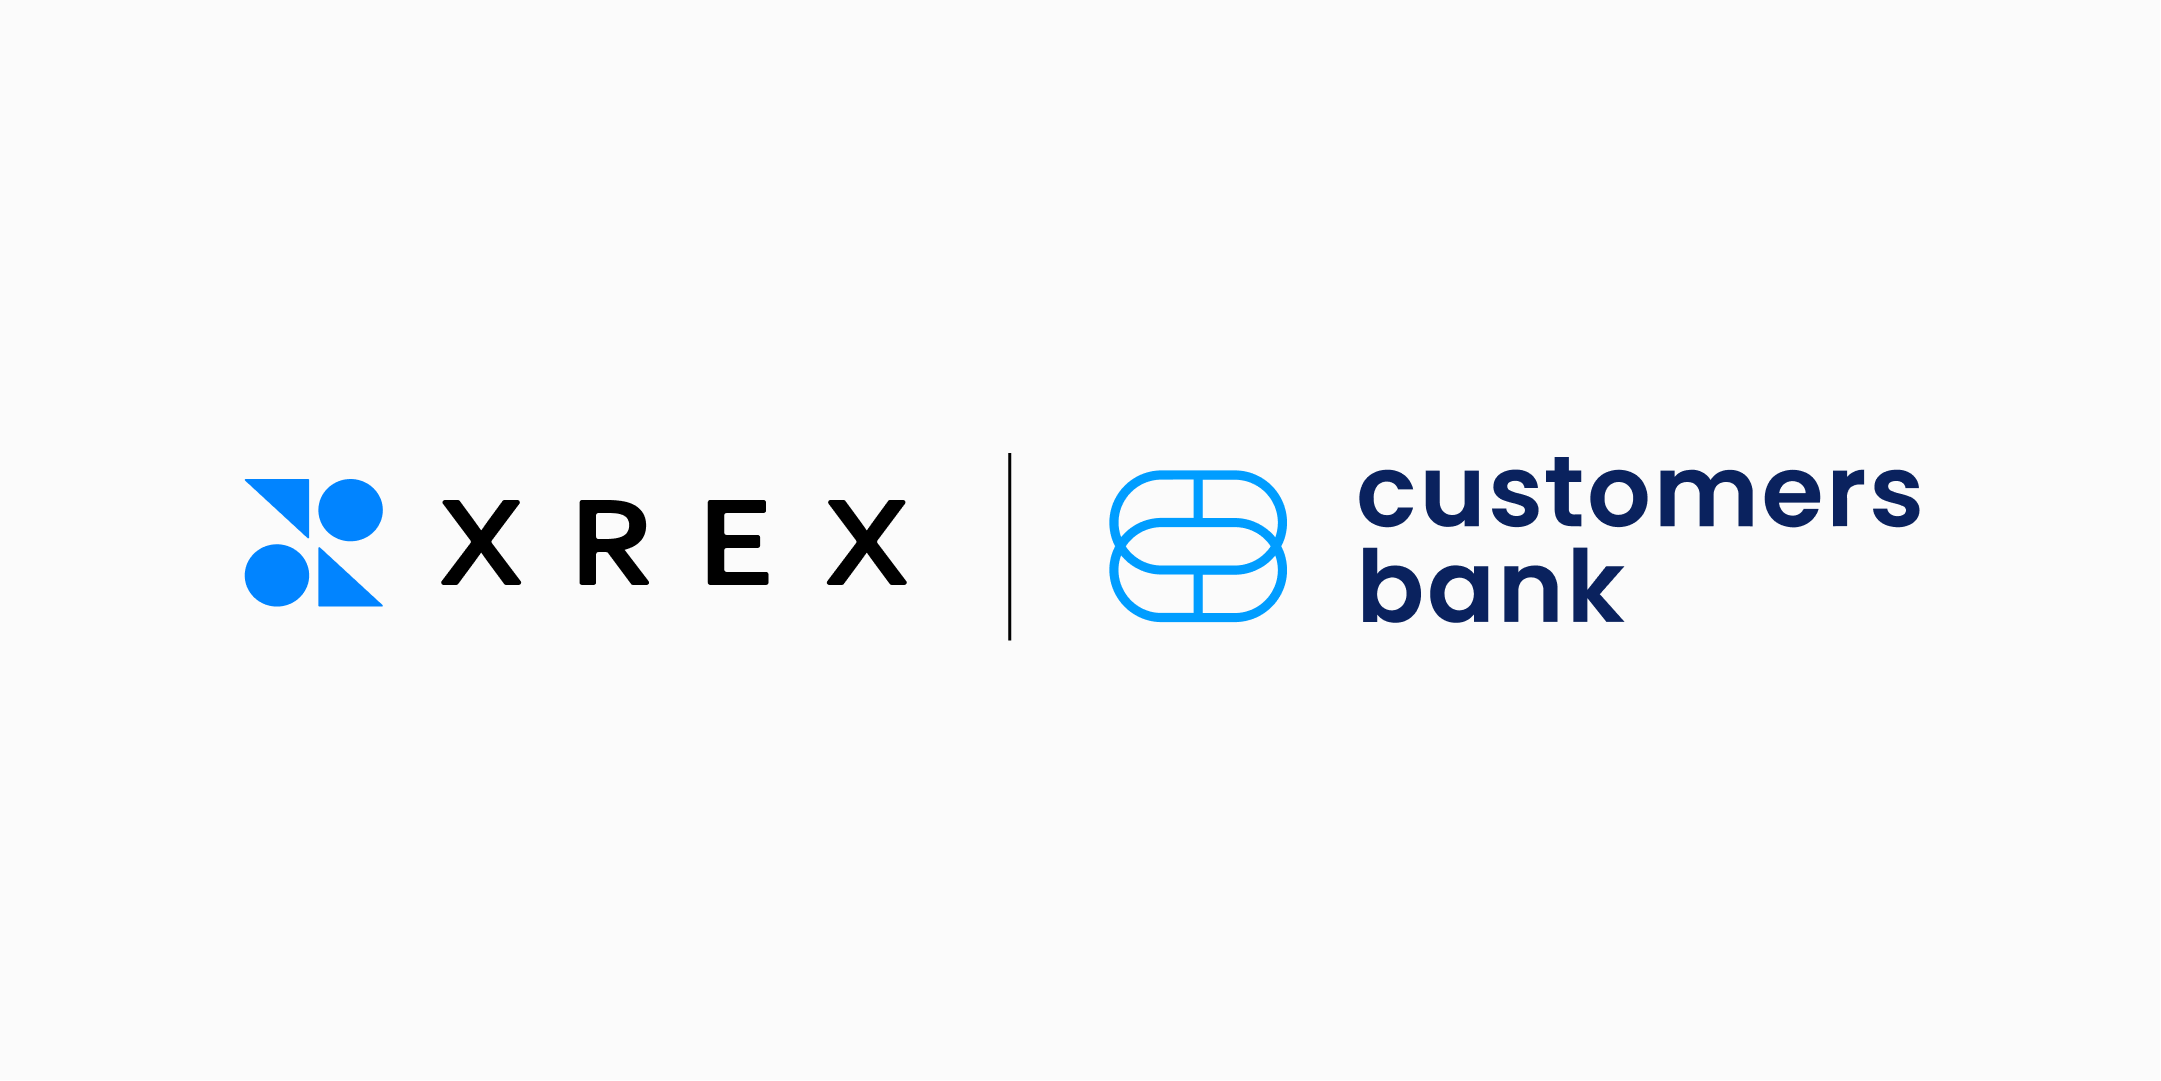 XREX Expands Fiat Gateways by Partnering with Customers Bank